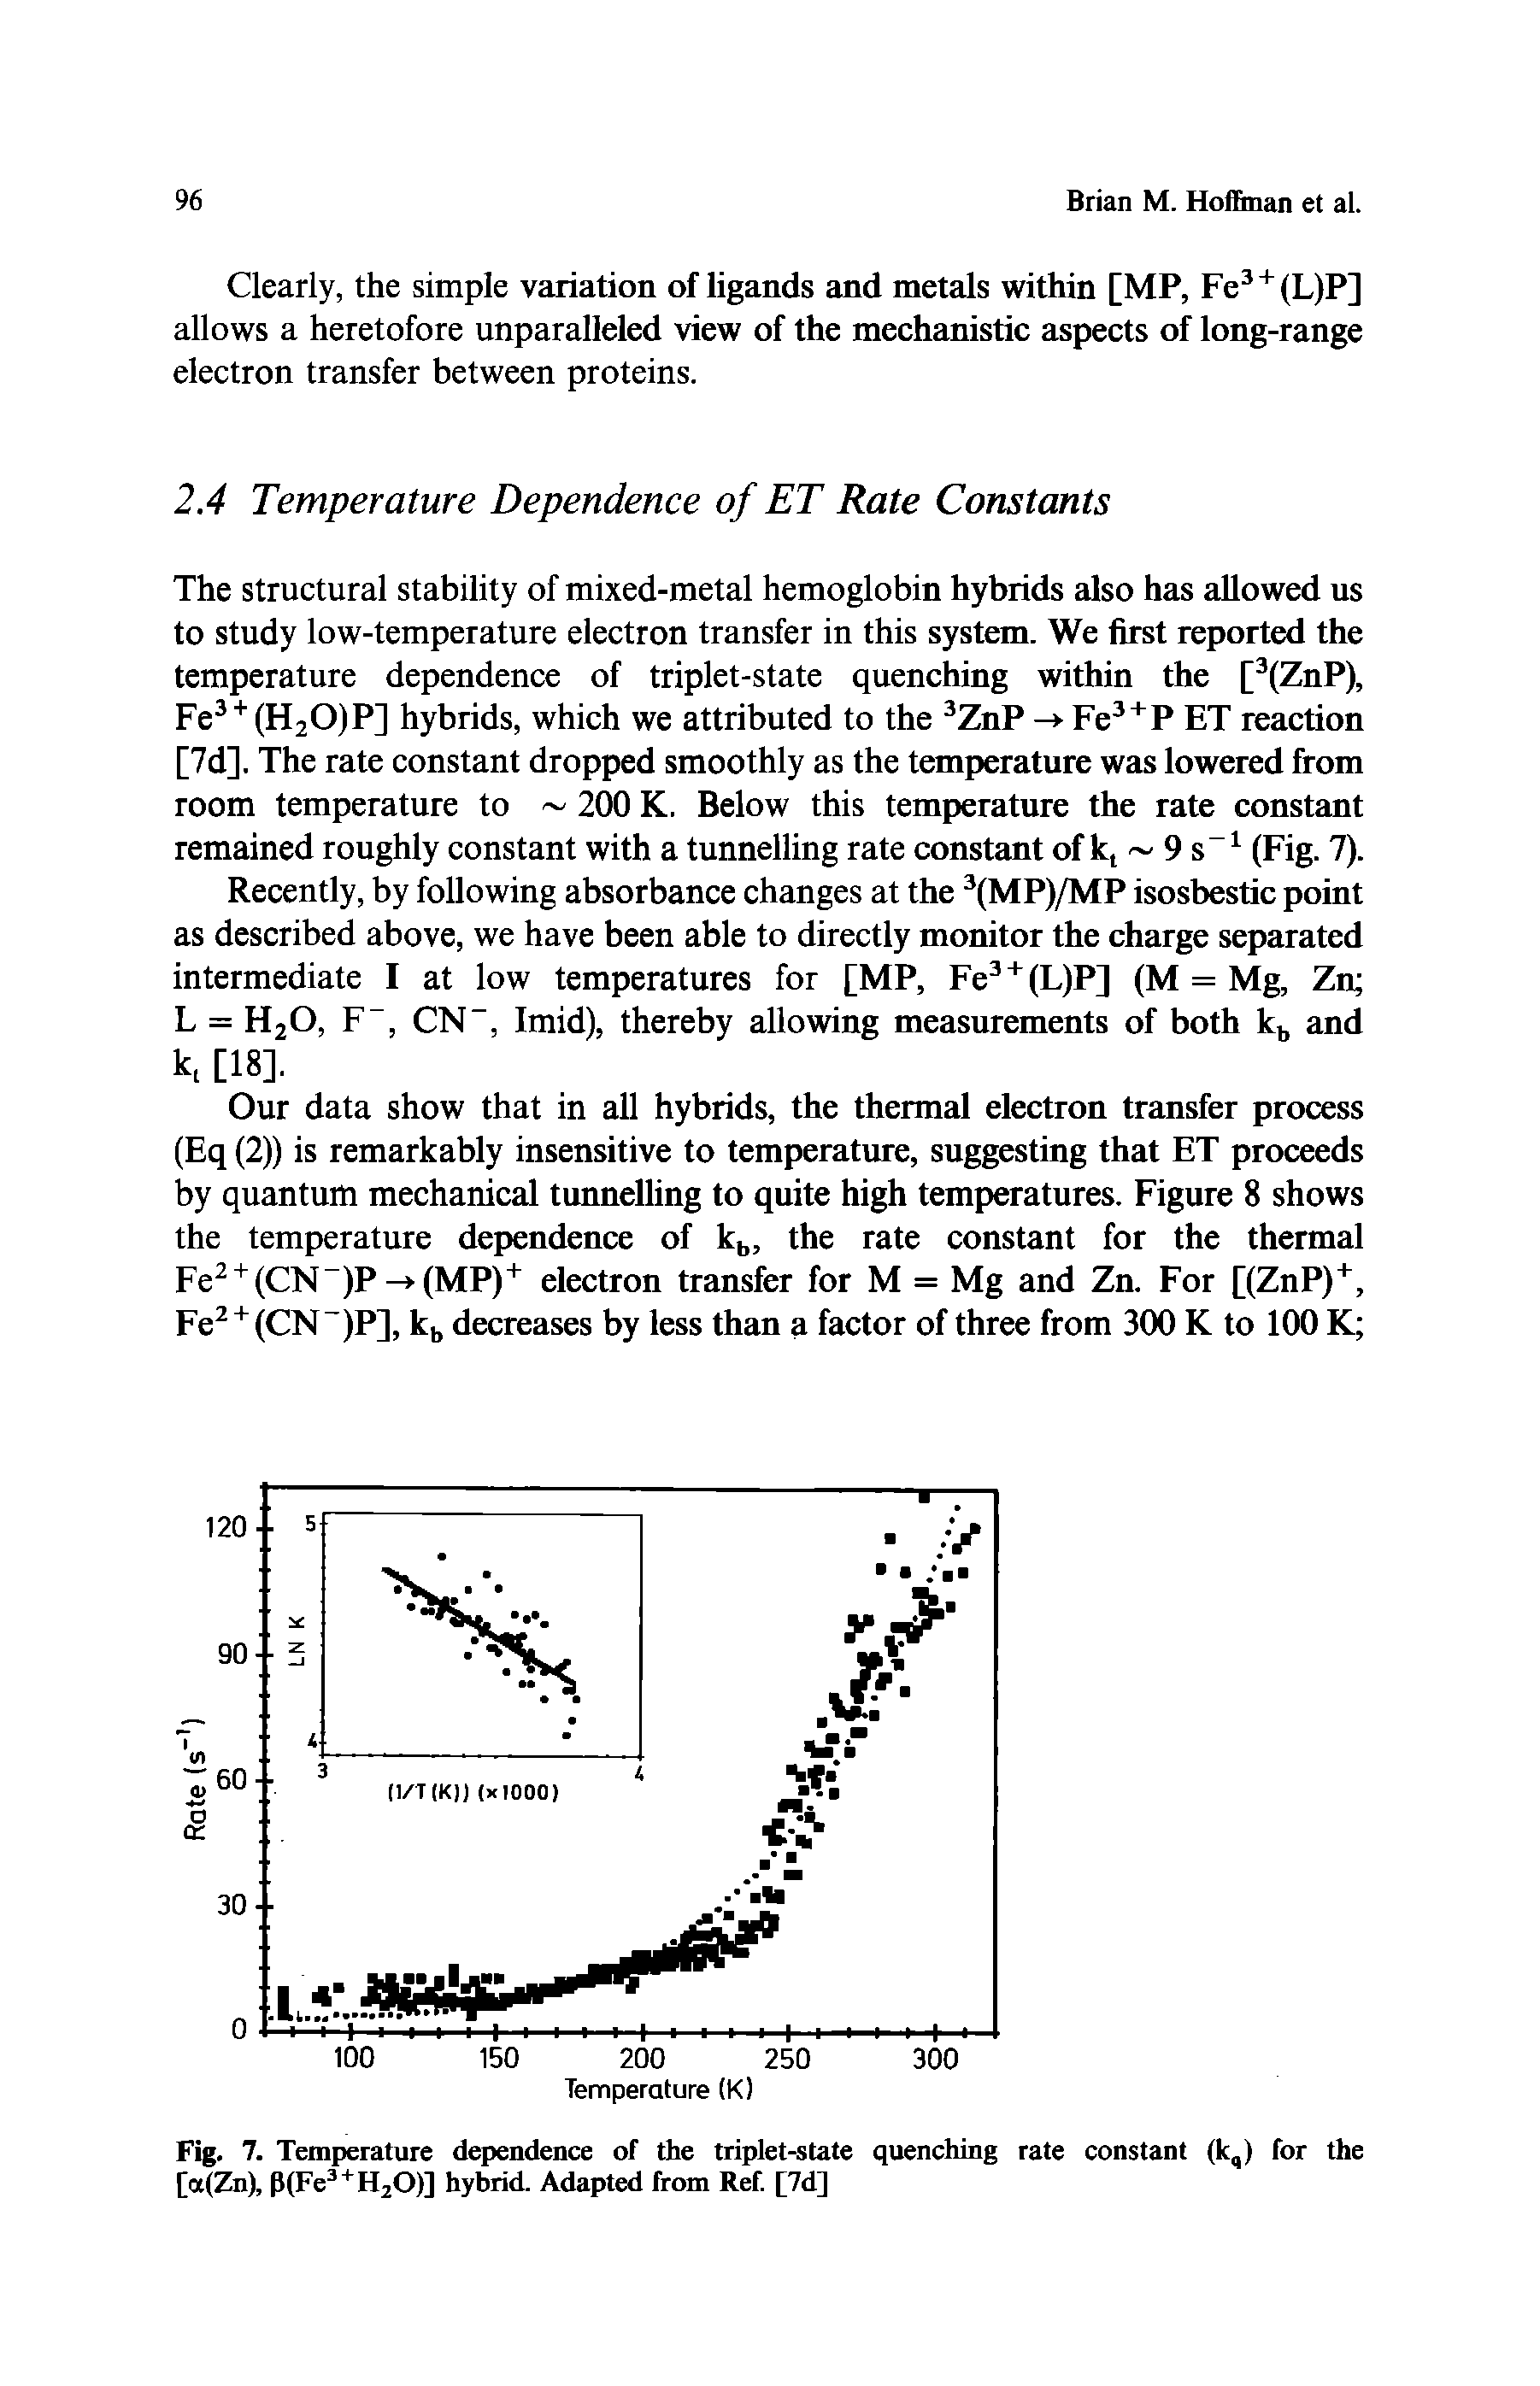 Fig. 7. Temperature dependence of the triplet-state quenching rate constant (k,) for the [a(Zn), PiFe +HjO)] hybrid. Adapted from Ret [7d]...